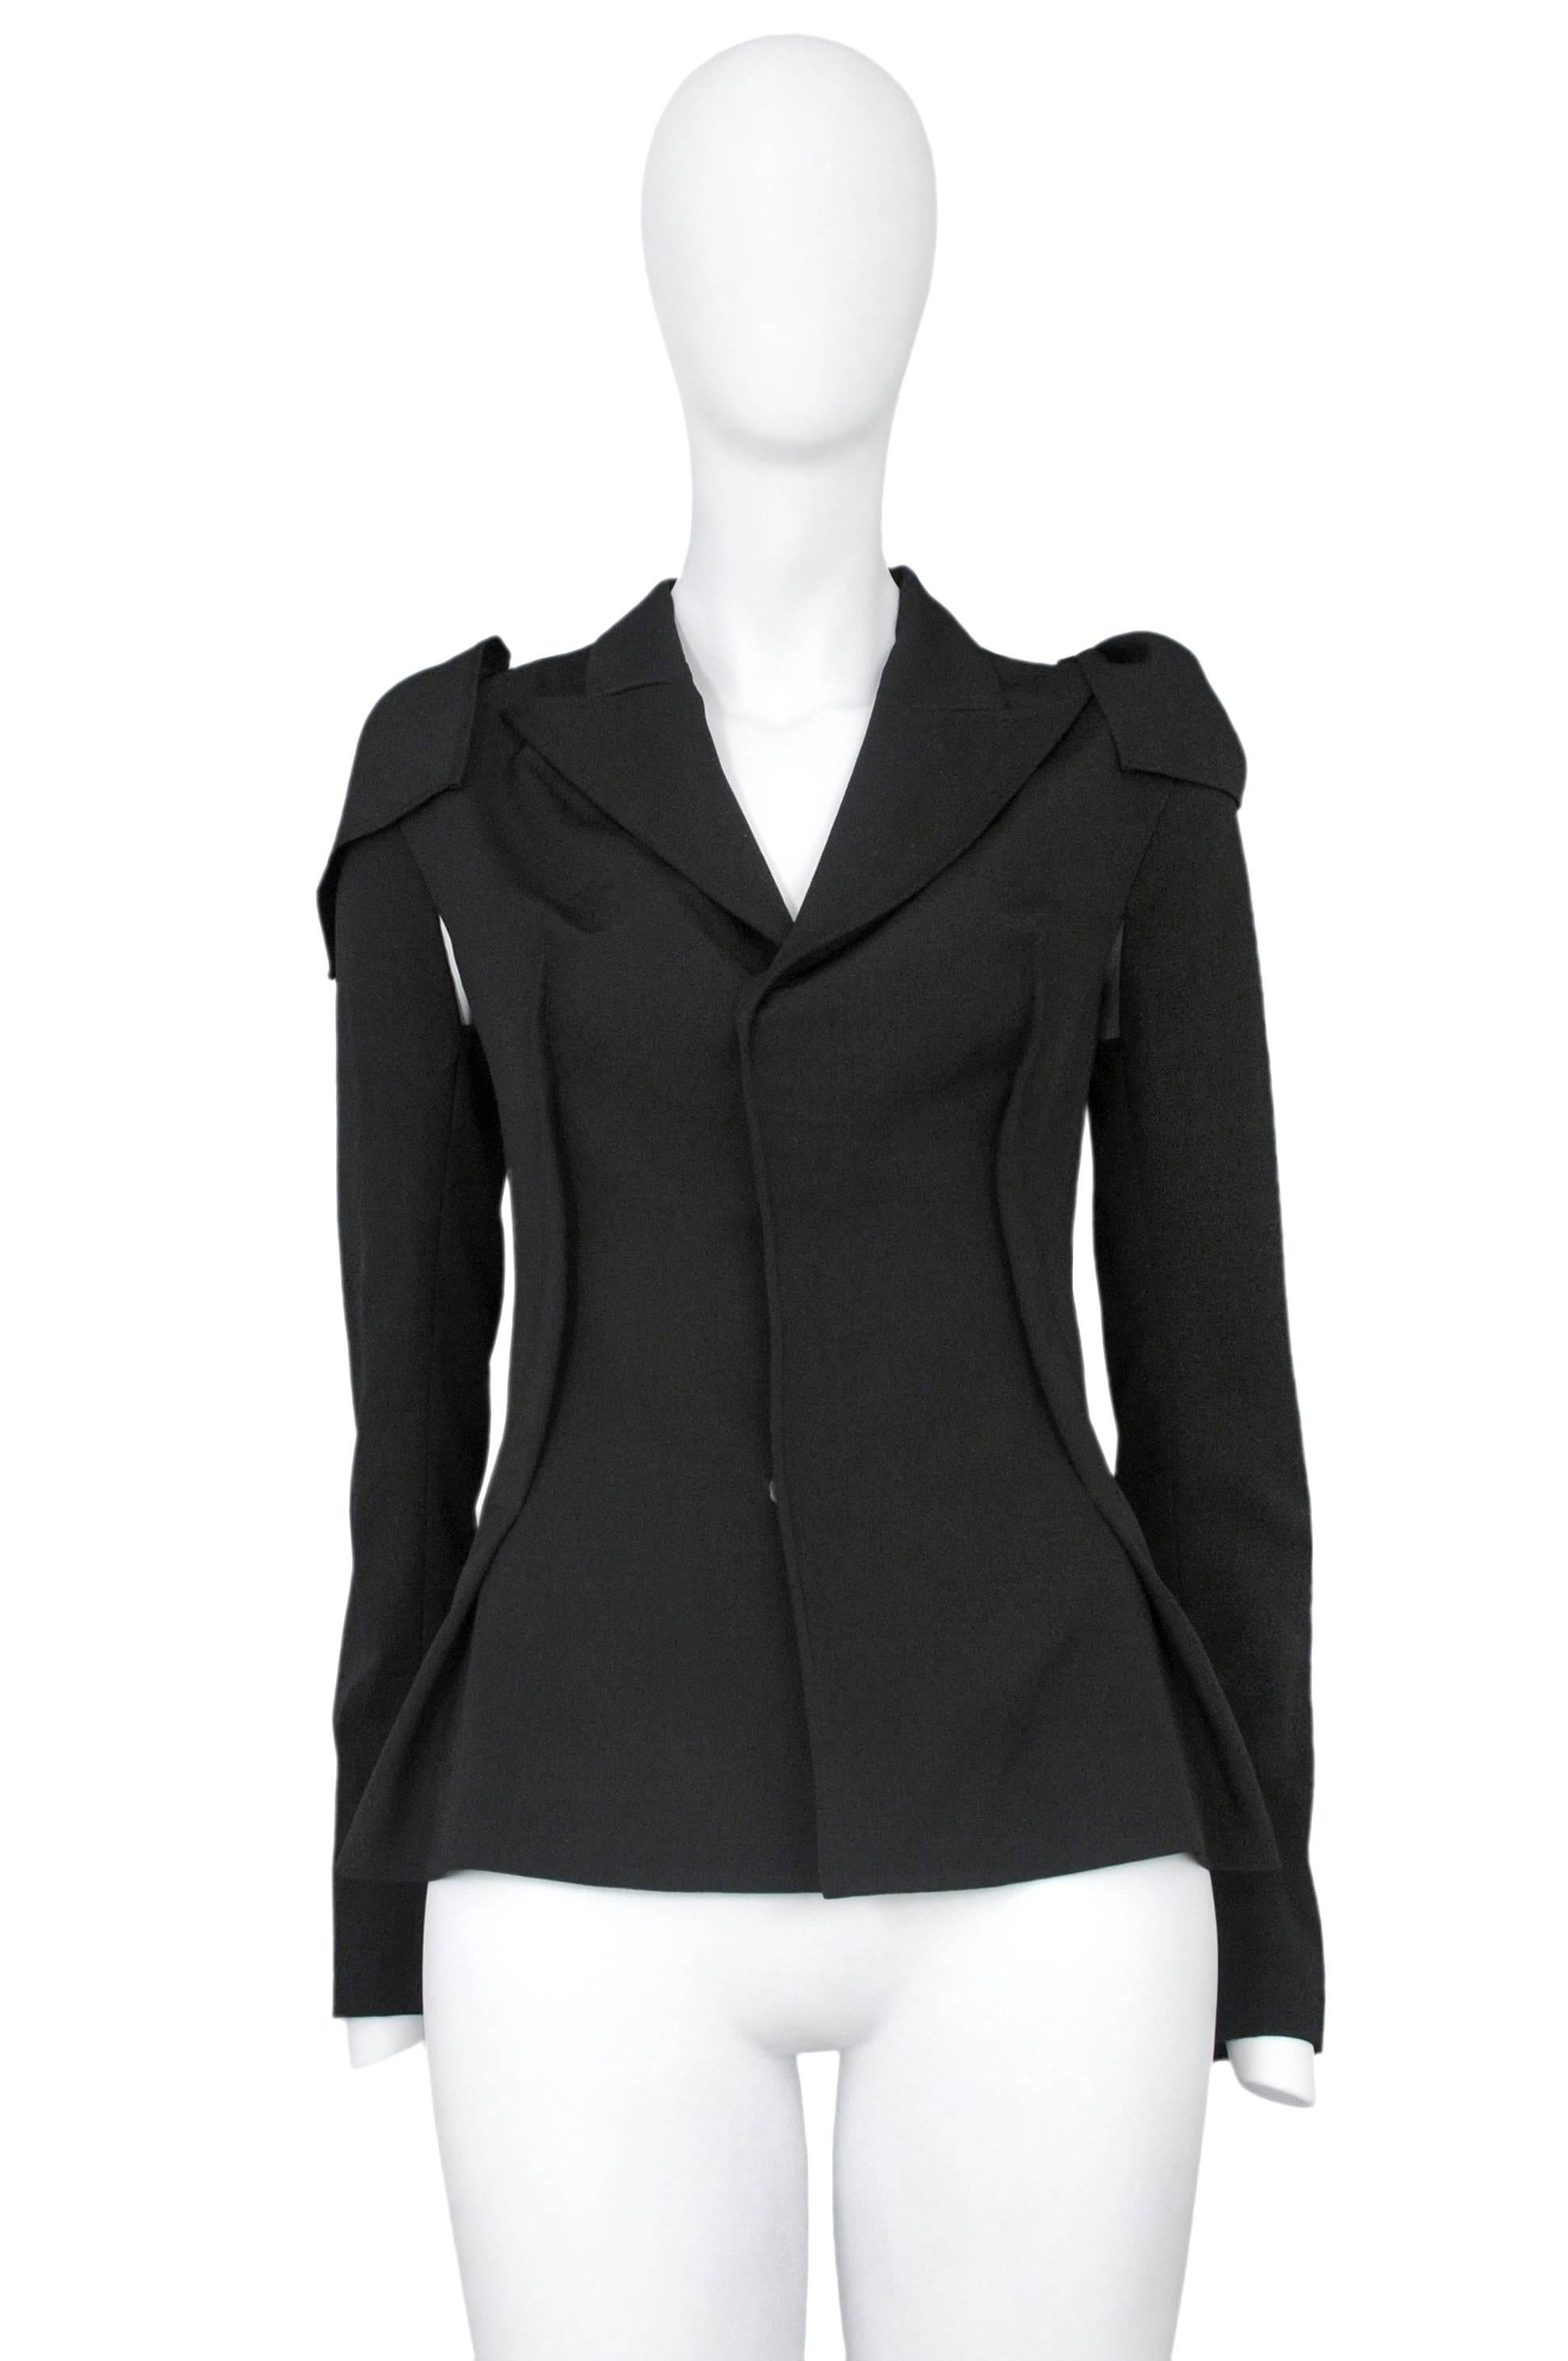 Vintage Yohji Yamamoto black blazer featuring two reversed darts at the front torso and two removable long sleeves that get pulled through a hole atop either shoulder to hold their place.
Please inquire for additional images.